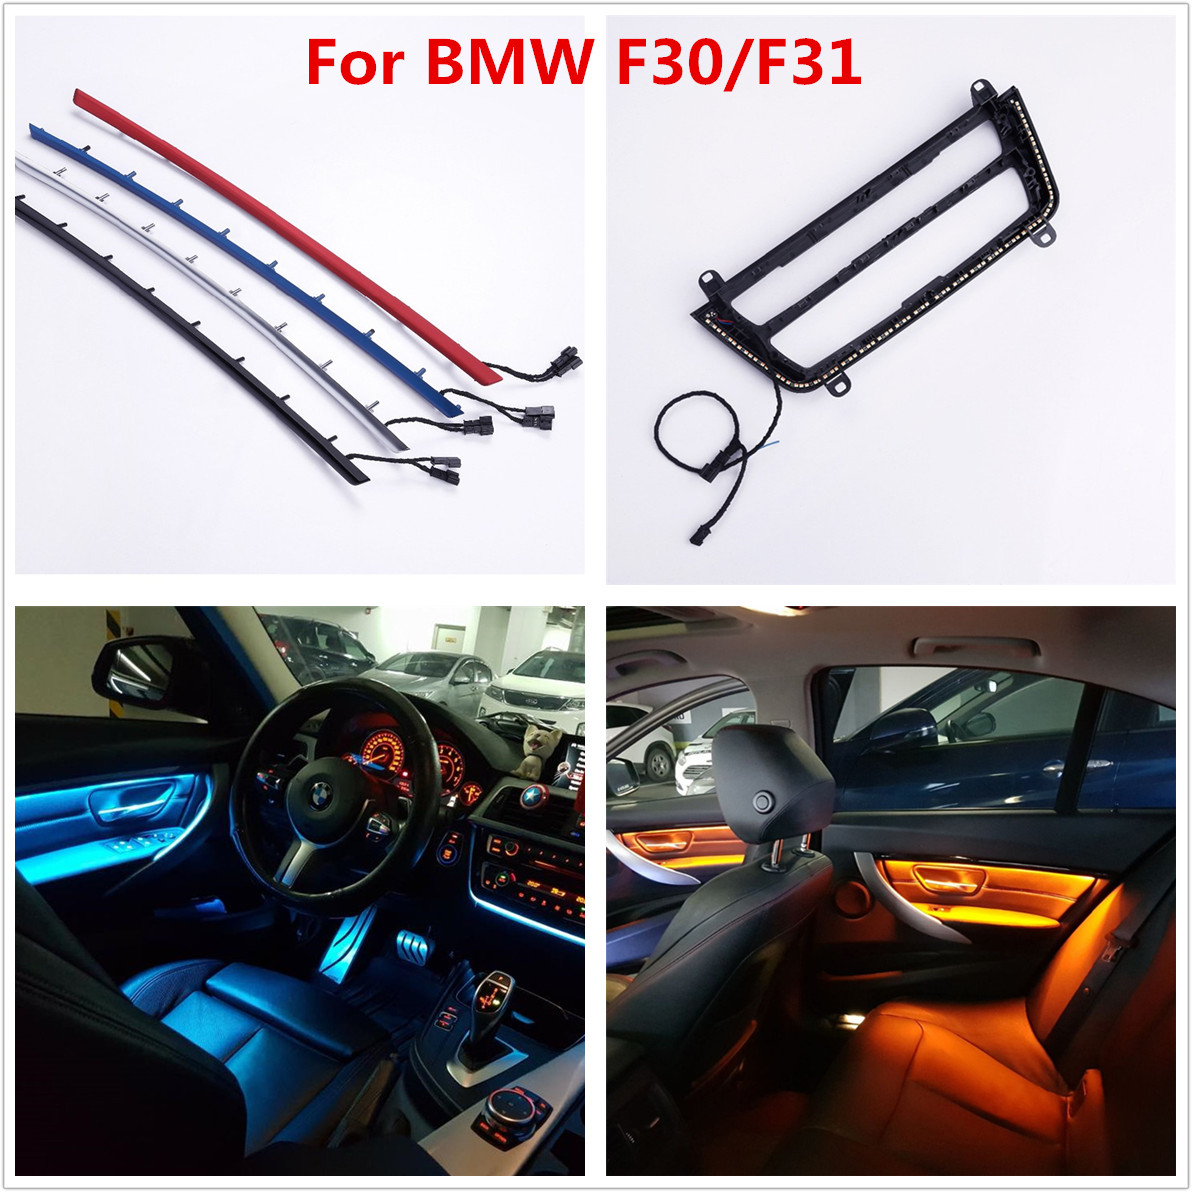 Details About For Bmw F30 F31 Interior Door Panel Central Control Decor Atmosphere Light Strip